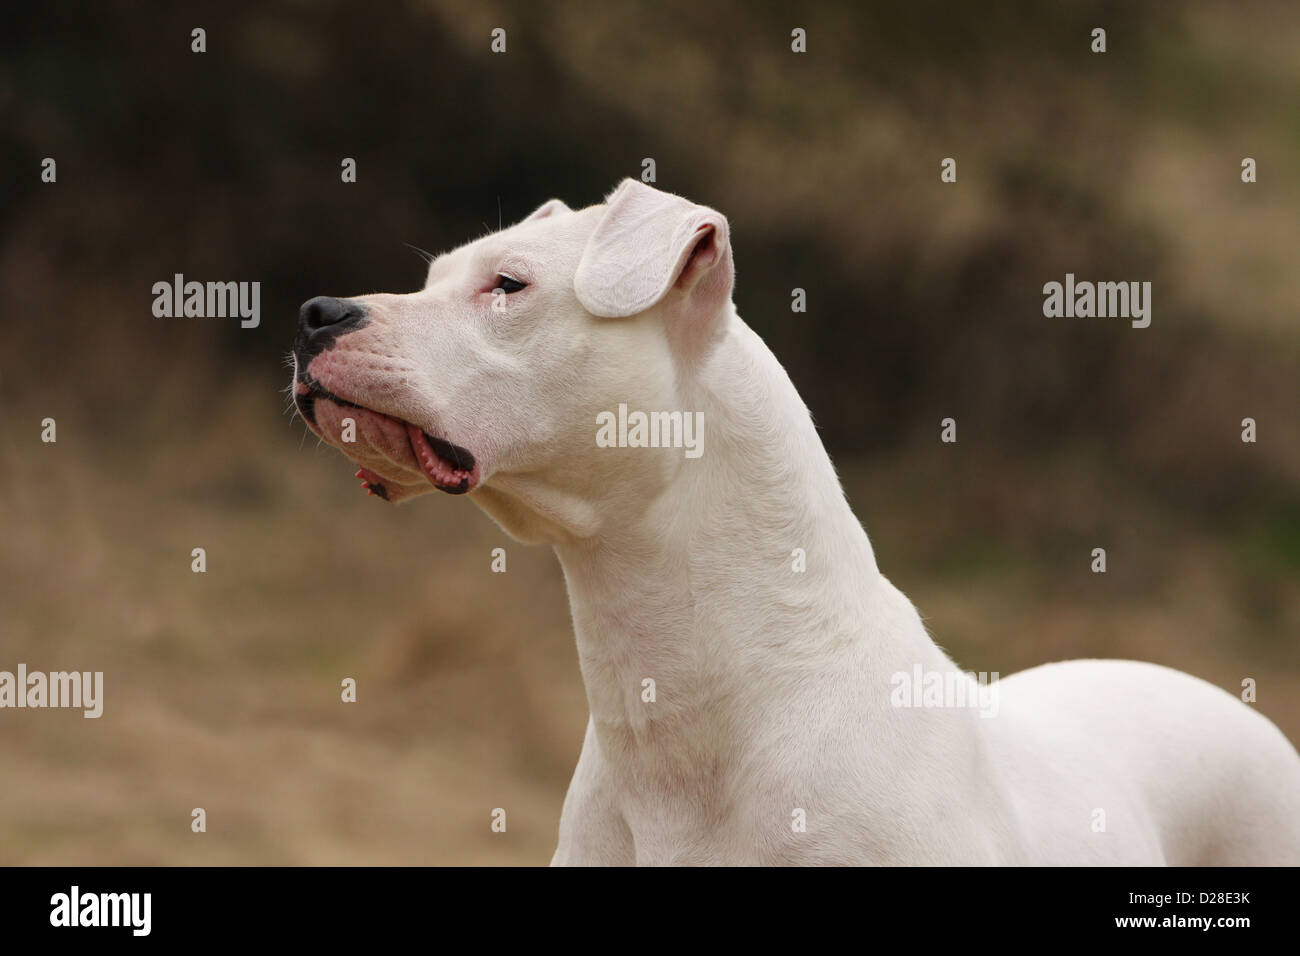 Dog Dogo Argentino / Dogue Argentin (natural ears) adult portrait Stock Photo